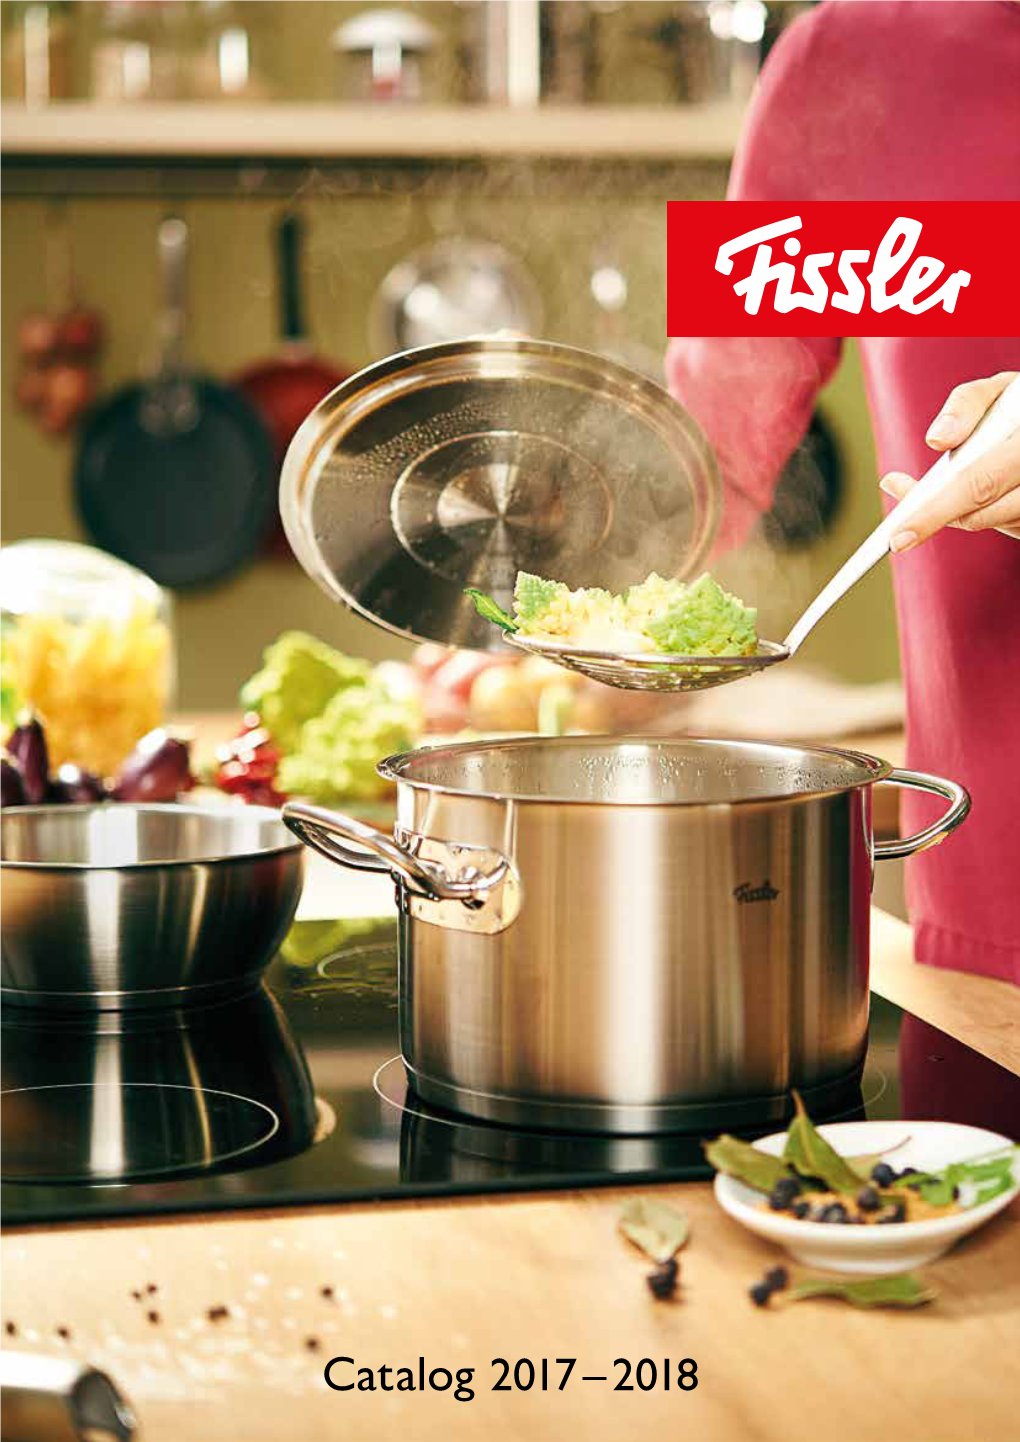 Fissler Pressure Cooker Accessories 37 Vitaquick® 38 Specialty Cooking – Asian Cuisine 42 Woks 44 Specialty Cooking – Home-Style Food 46 Roasters 48